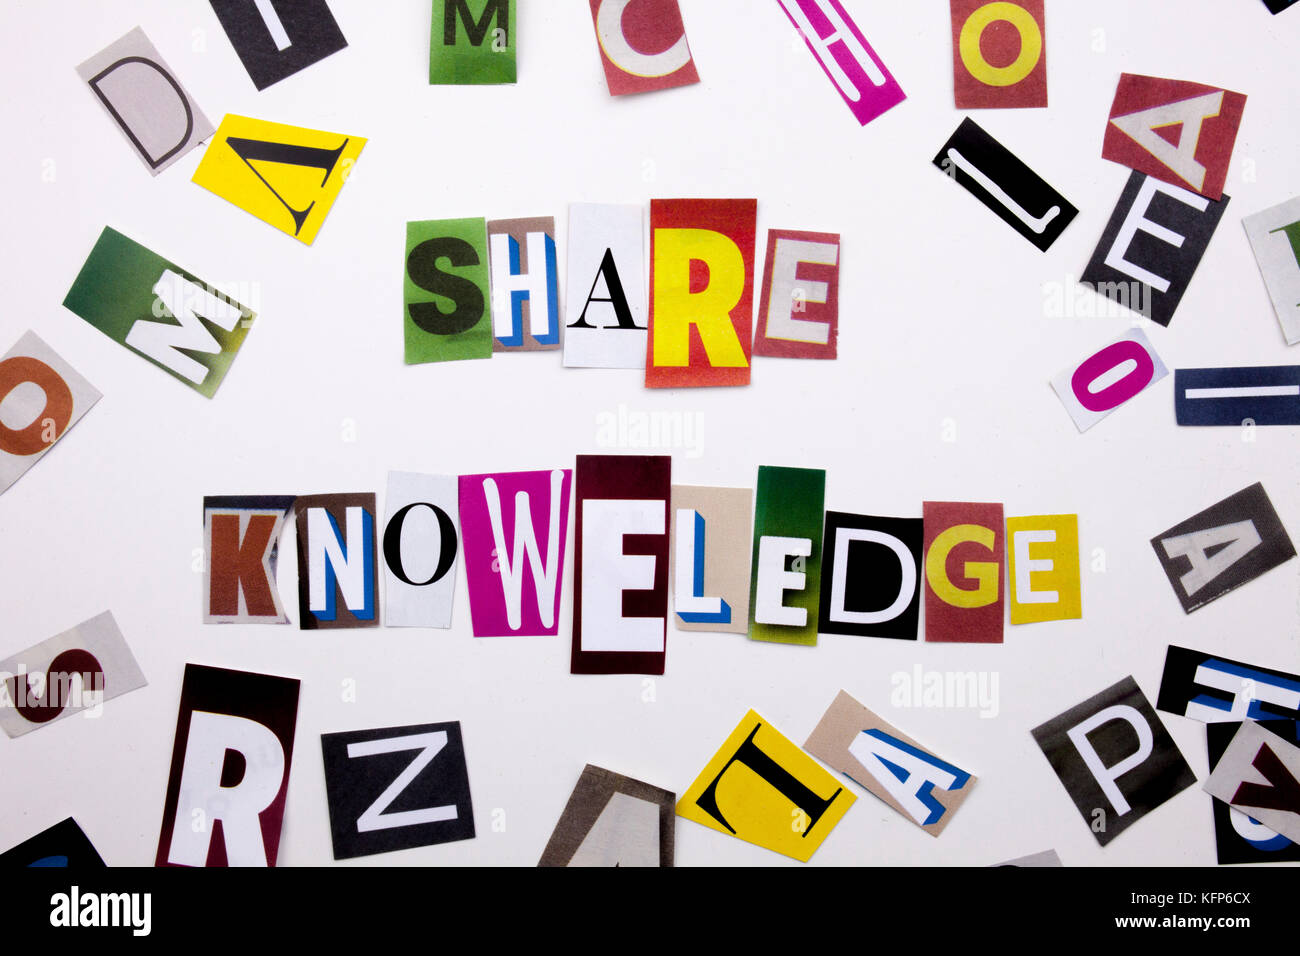 A word writing text showing concept of SHARE KNOWELEDGE made of different magazine newspaper letter for Business case on the white background with spa Stock Photo